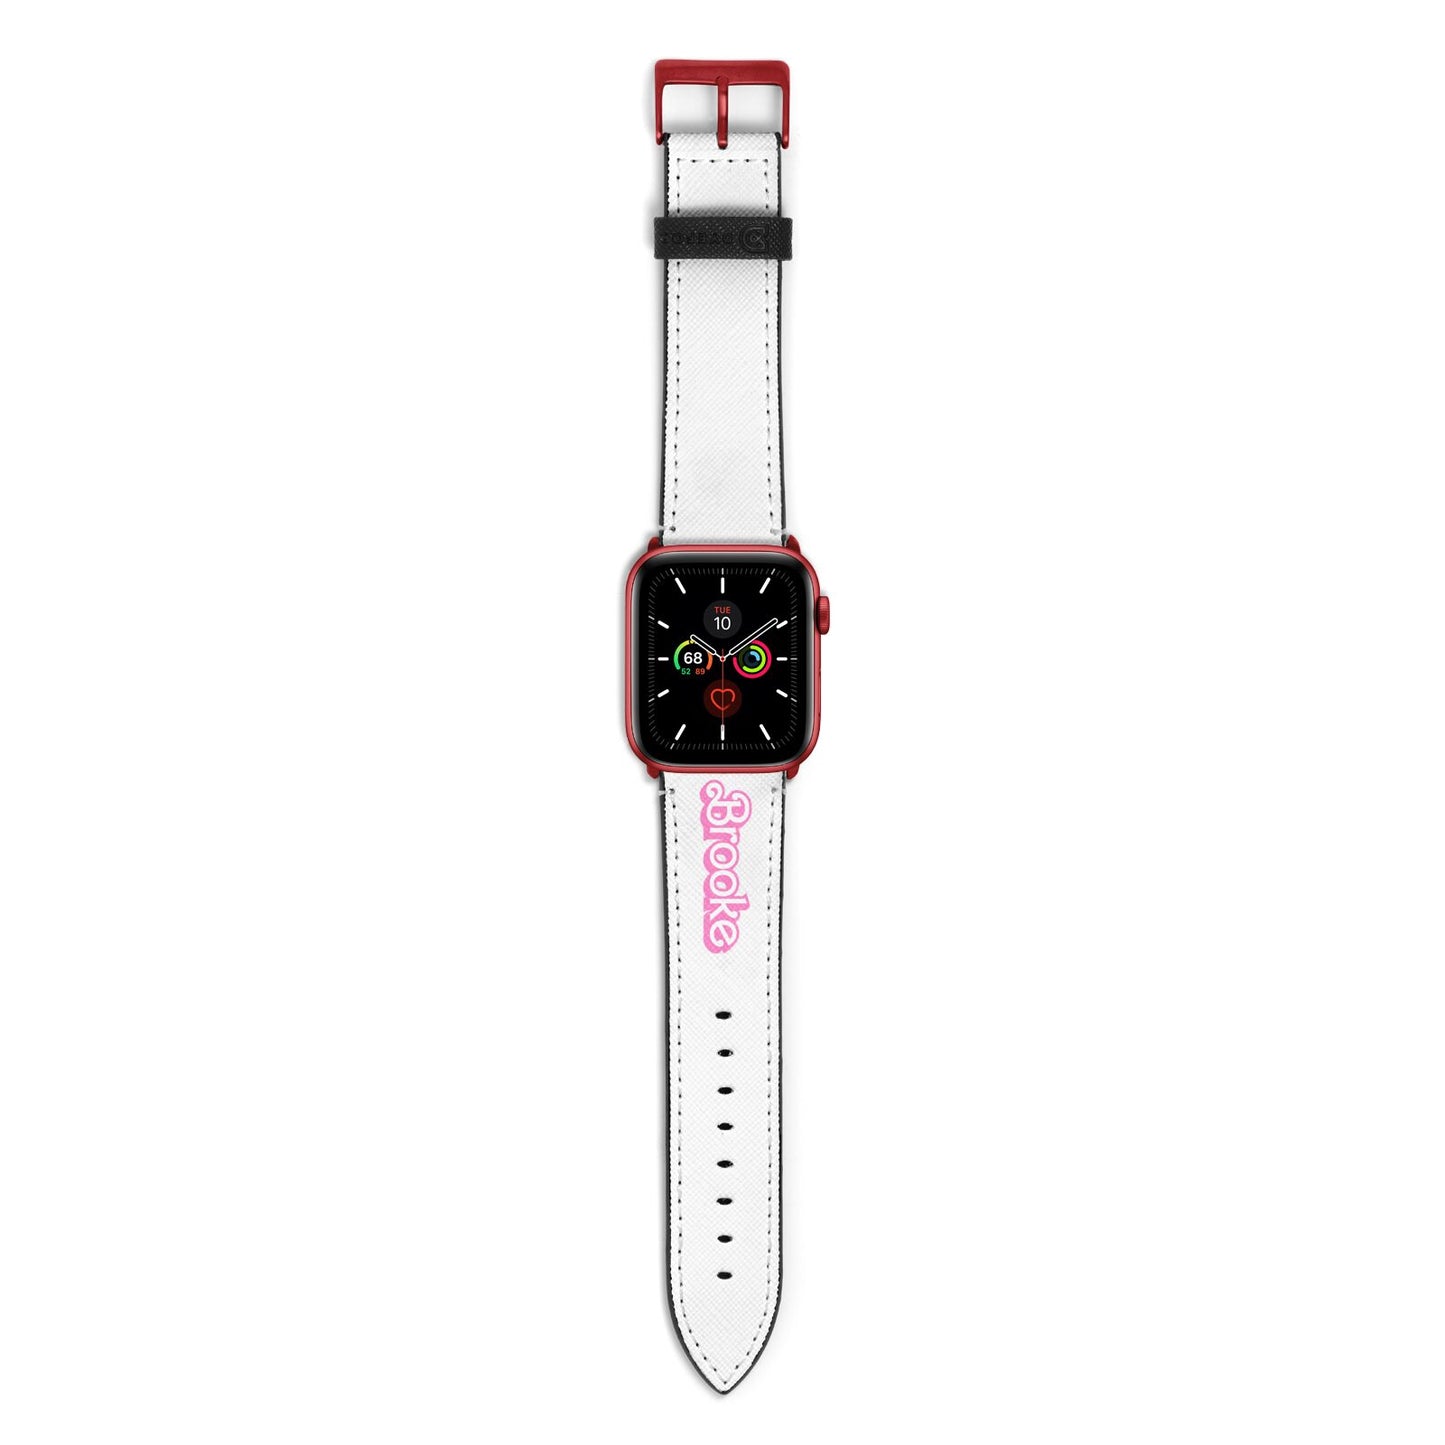 Dream Name Apple Watch Strap with Red Hardware